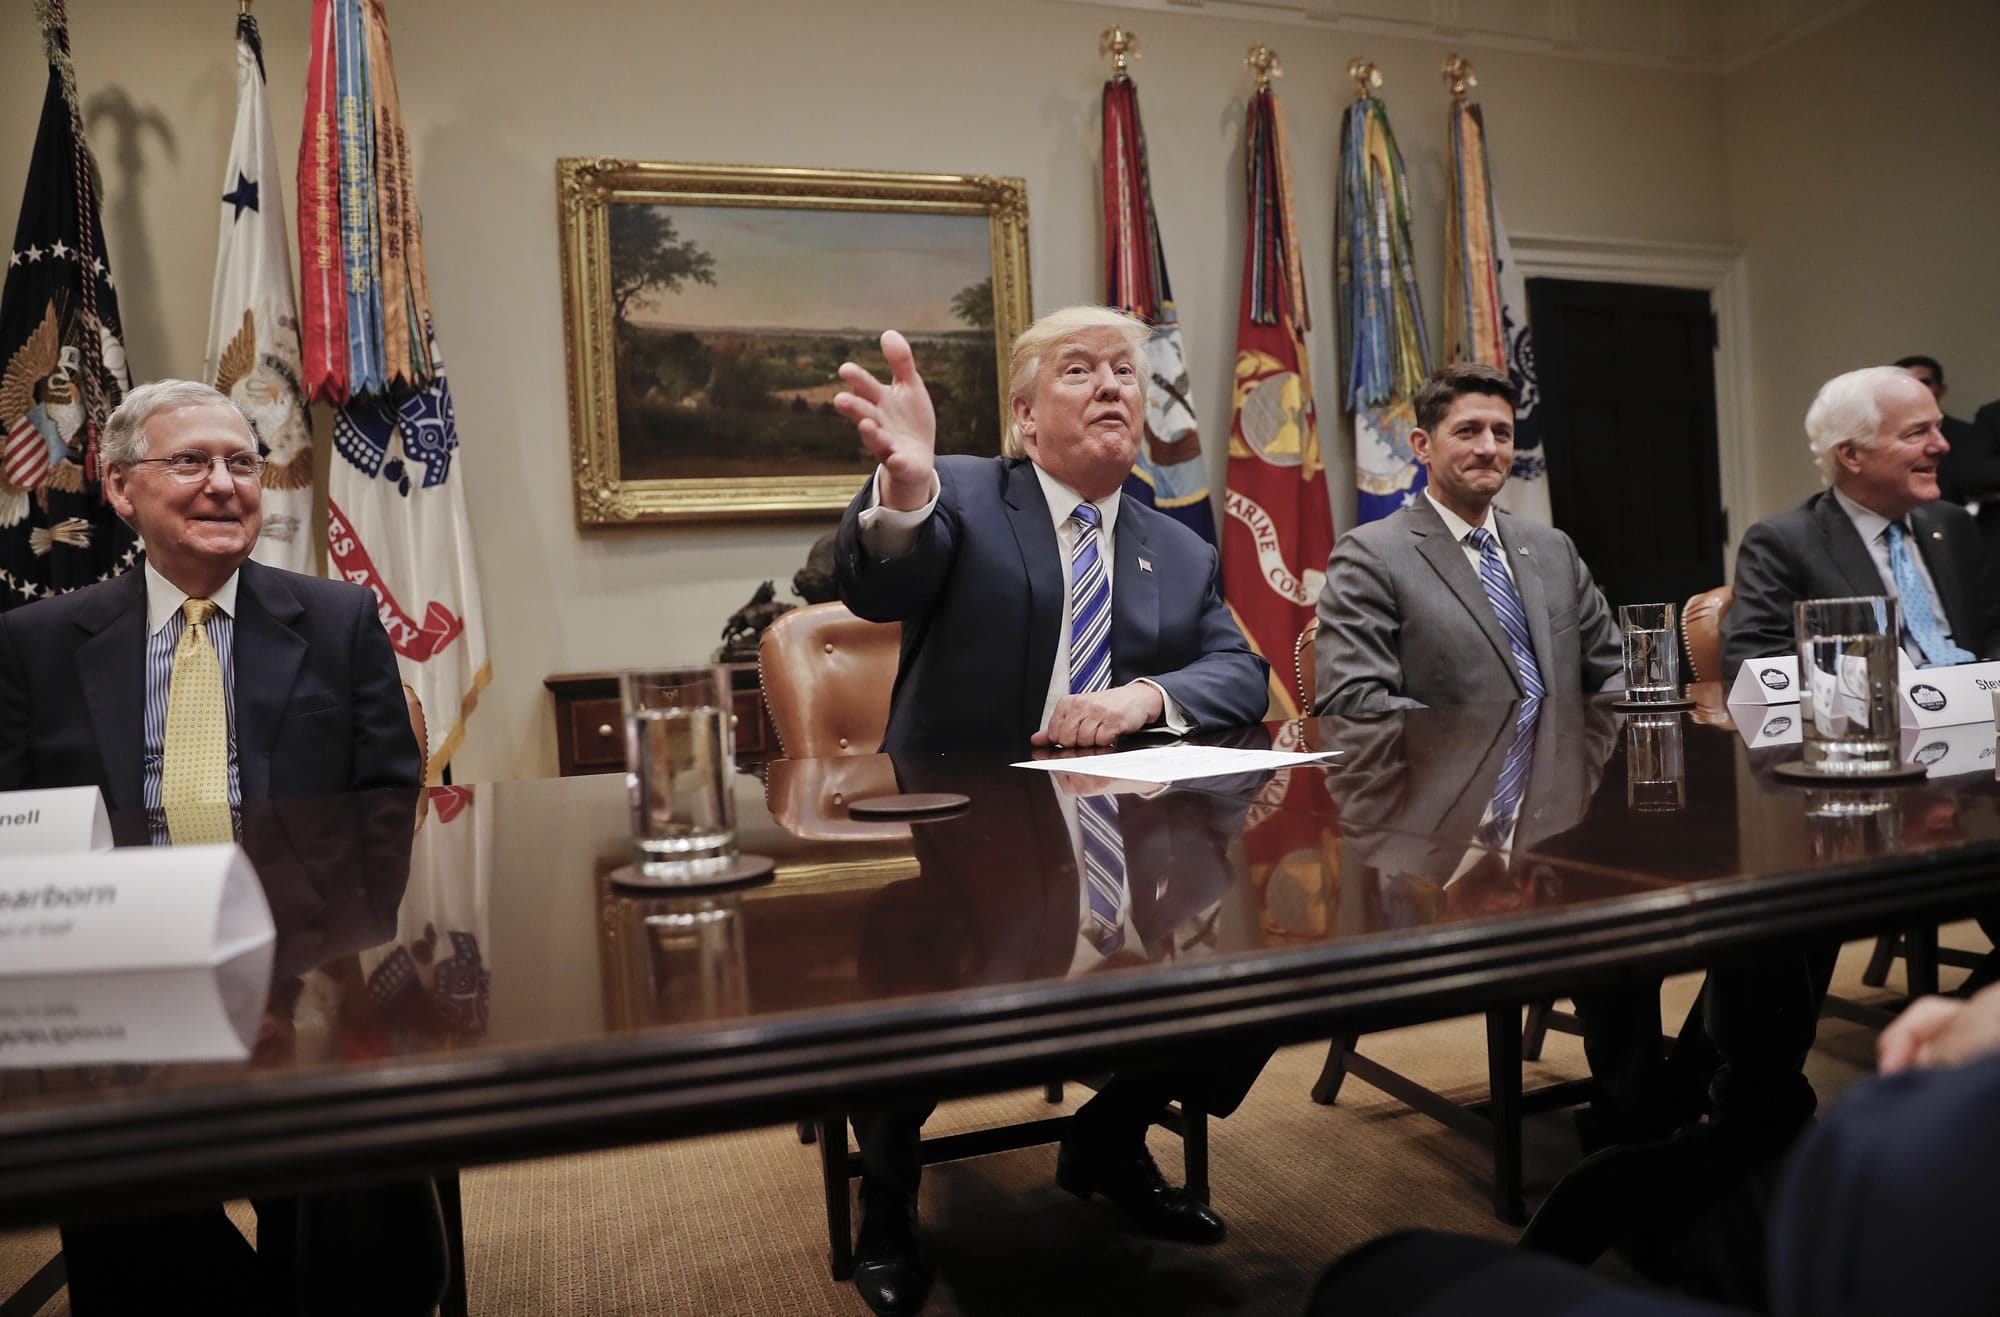 President Donald Trump, center, gestures during a meeting with House and Senate Leadership in the Roosevelt Room of the White House in Washington, Tuesday, June 6, 2017. With Trump are from left, Senate Majority Leader Mitch McConnell of Ky., House Speaker Paul Ryan of Wis., and Senate Majority Whip John Cornyn of Texas.